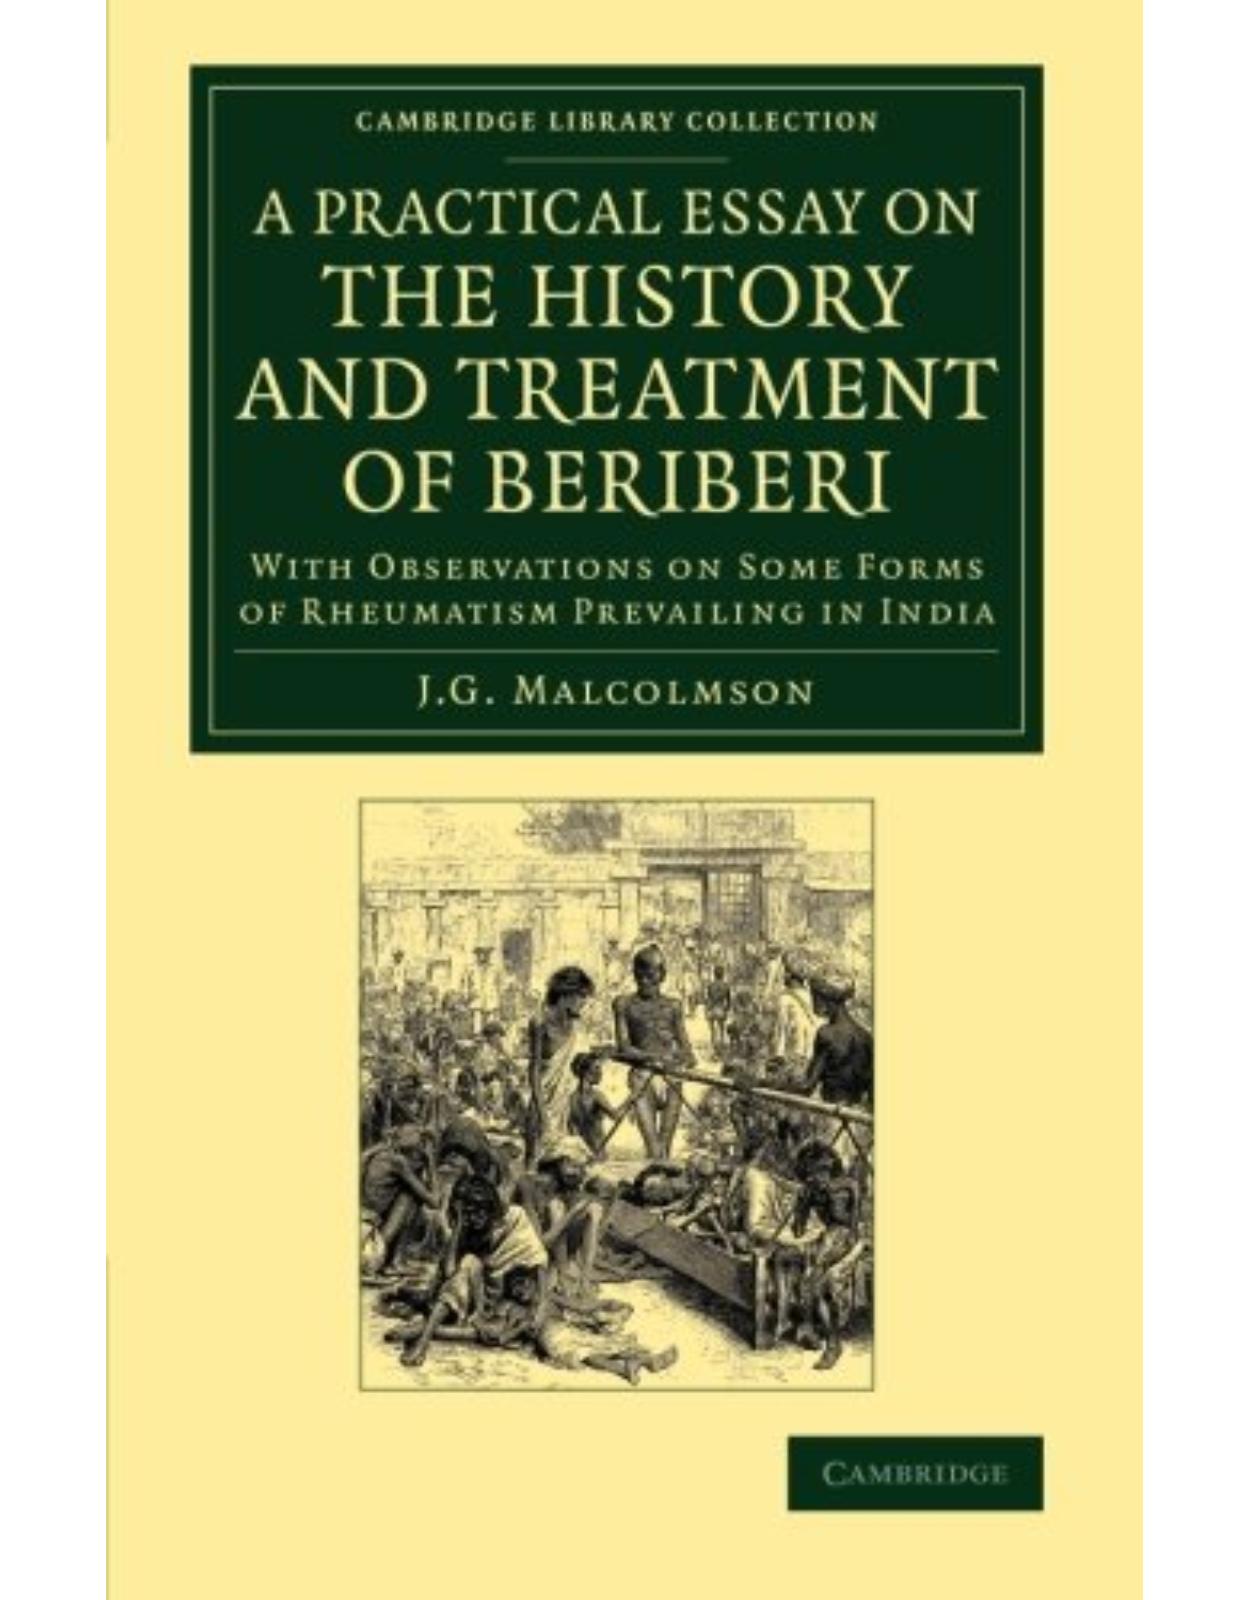 A Practical Essay on the History and Treatment of Beriberi: With Observations on Some Forms of Rheumatism Prevailing in India (Cambridge Library Collection - History of Medicine)